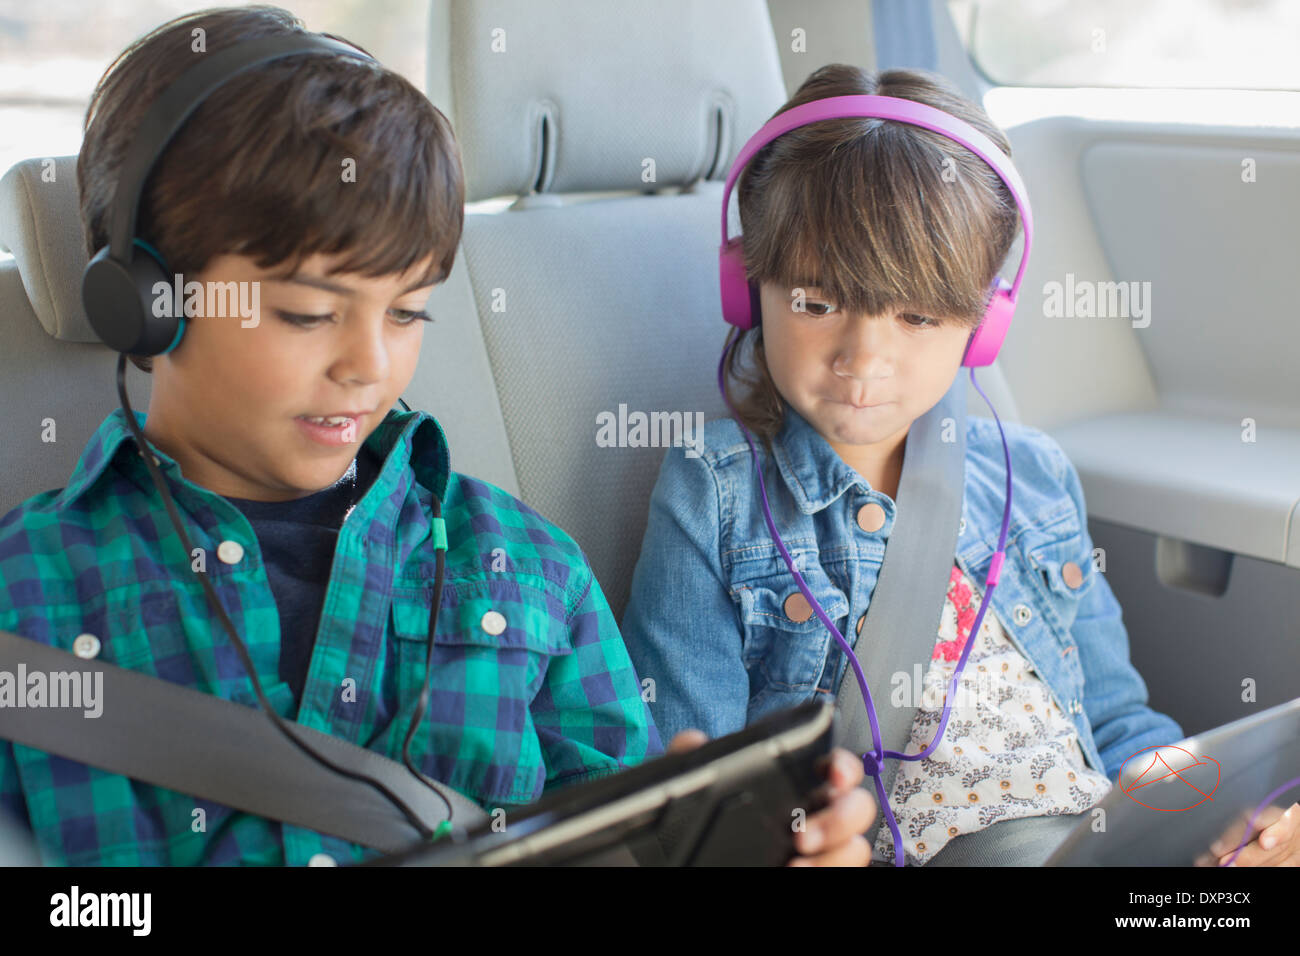 Brother and sister with headphones using digital tablets in back seat of car Stock Photo